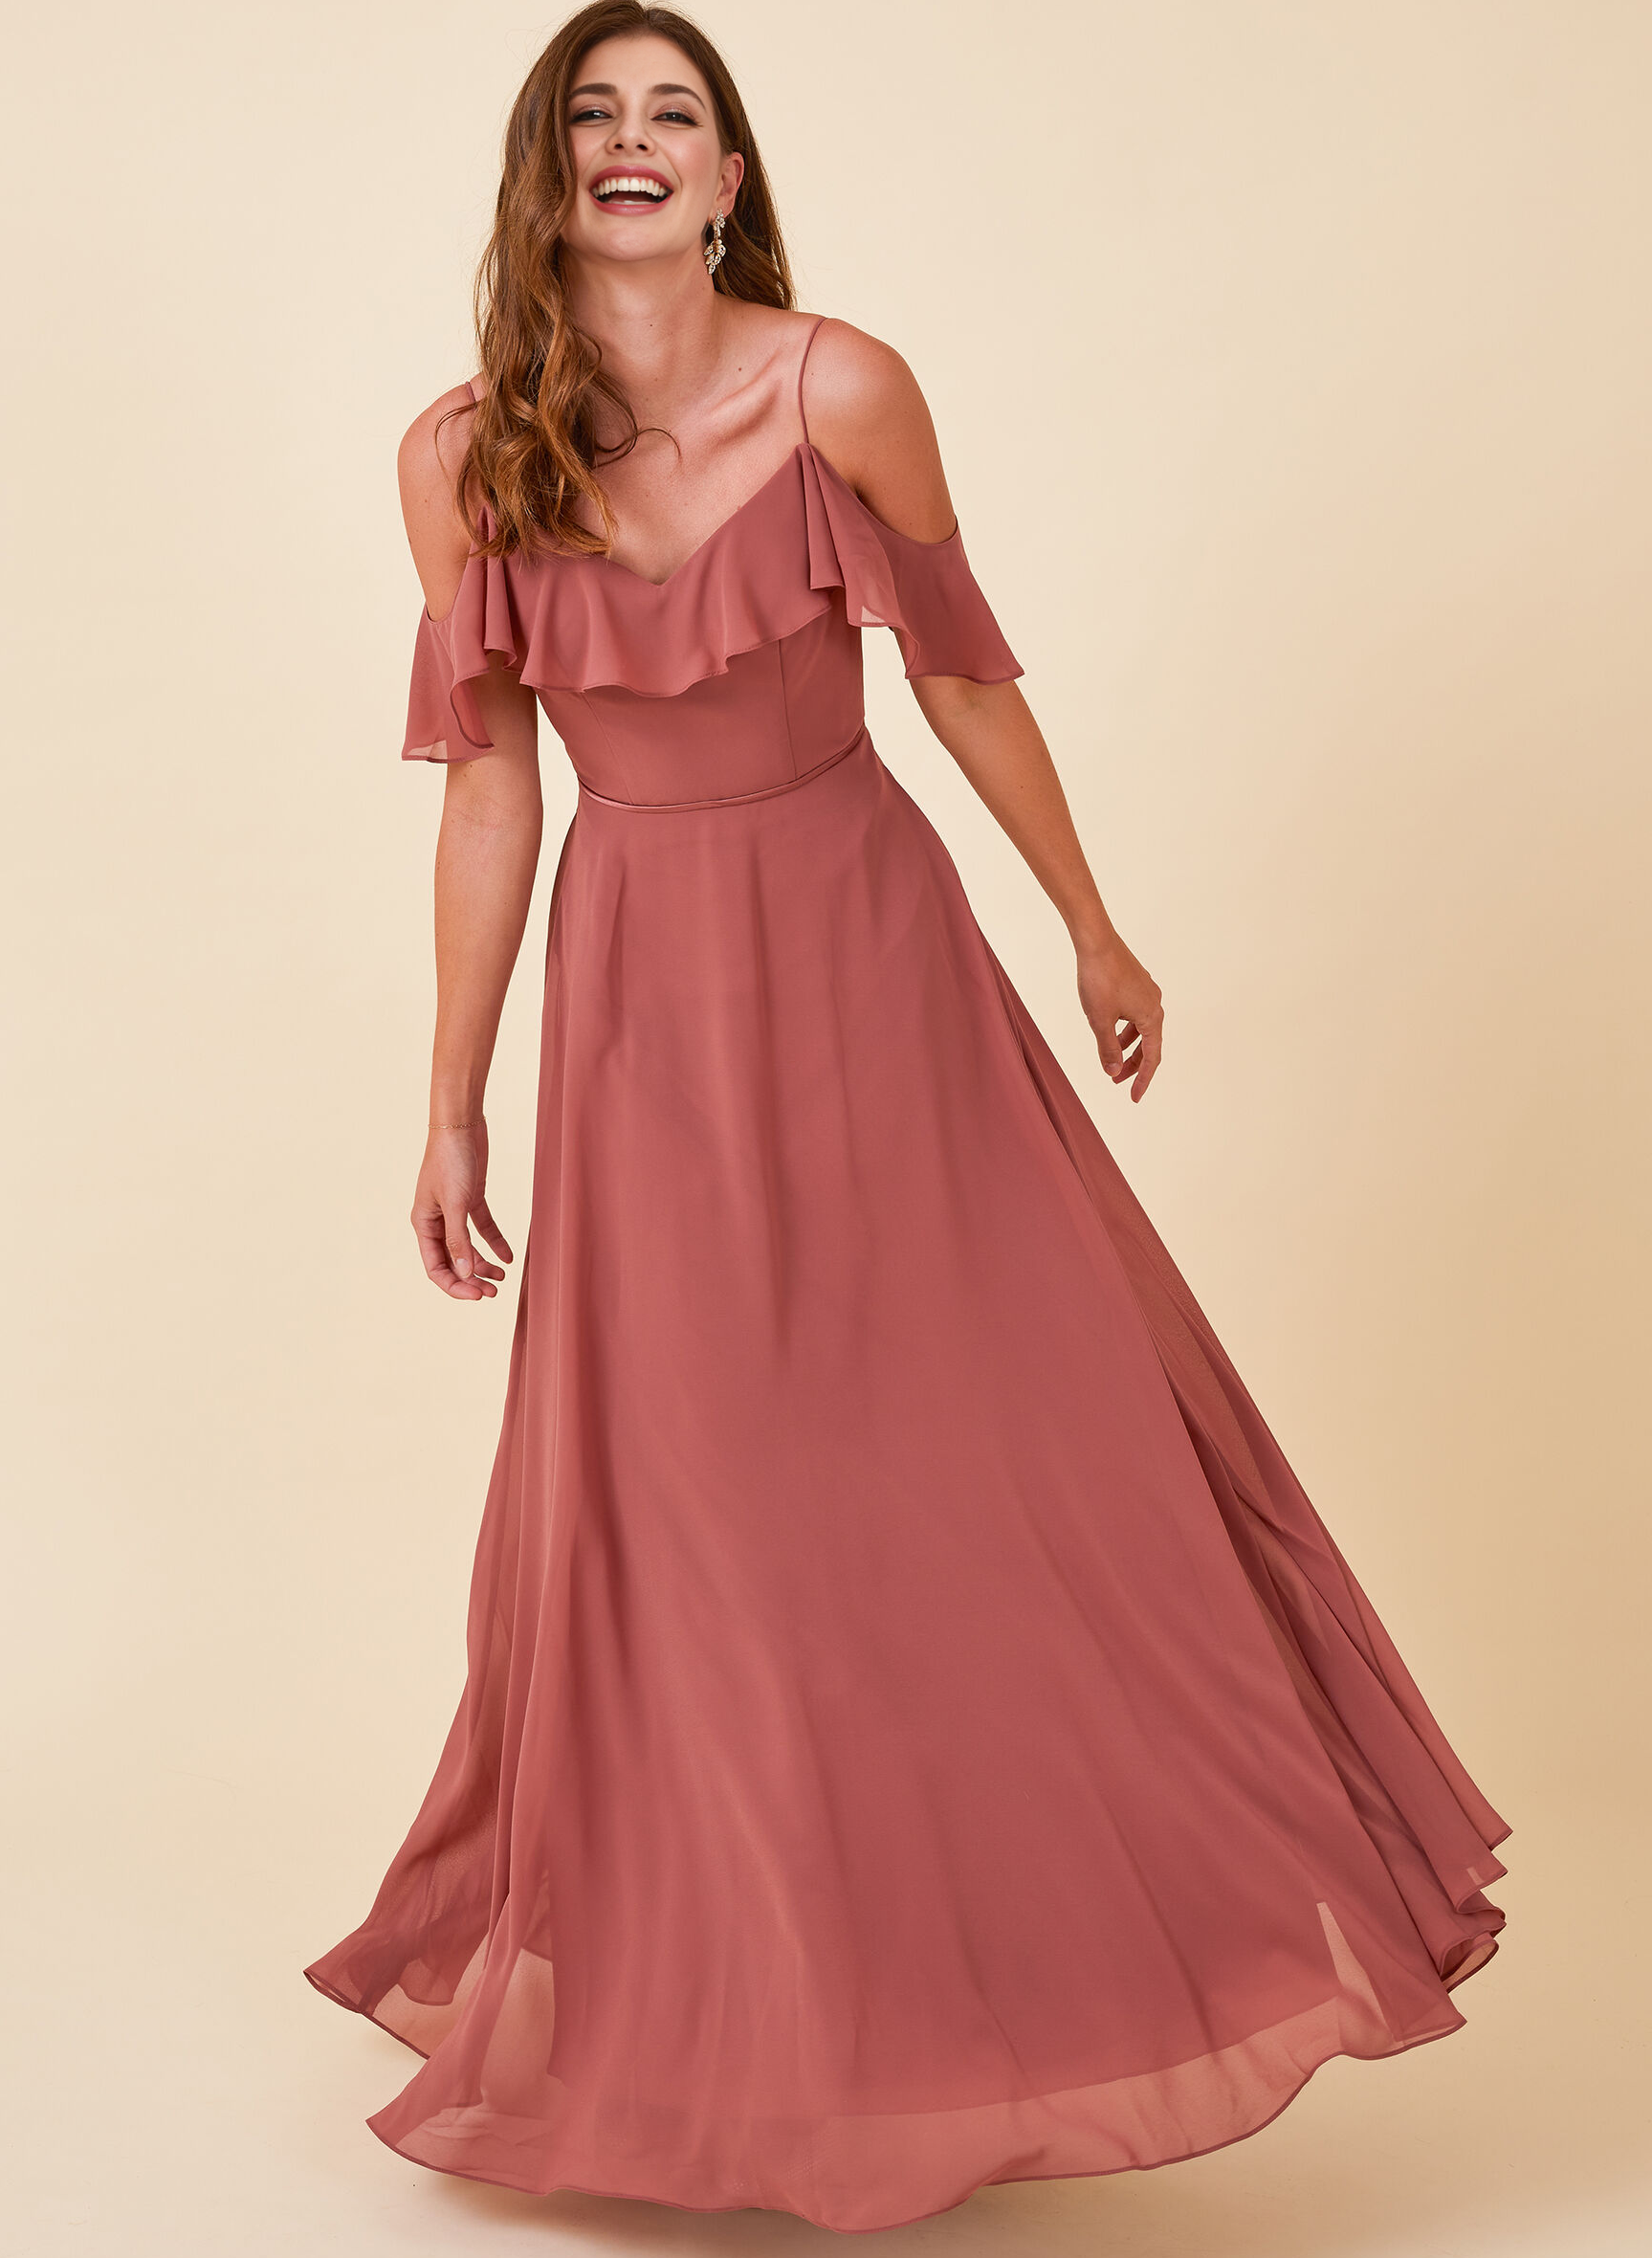 Sweet Ruffles Off-the-Shoulder Bridesmaid Dresses With Chiffon